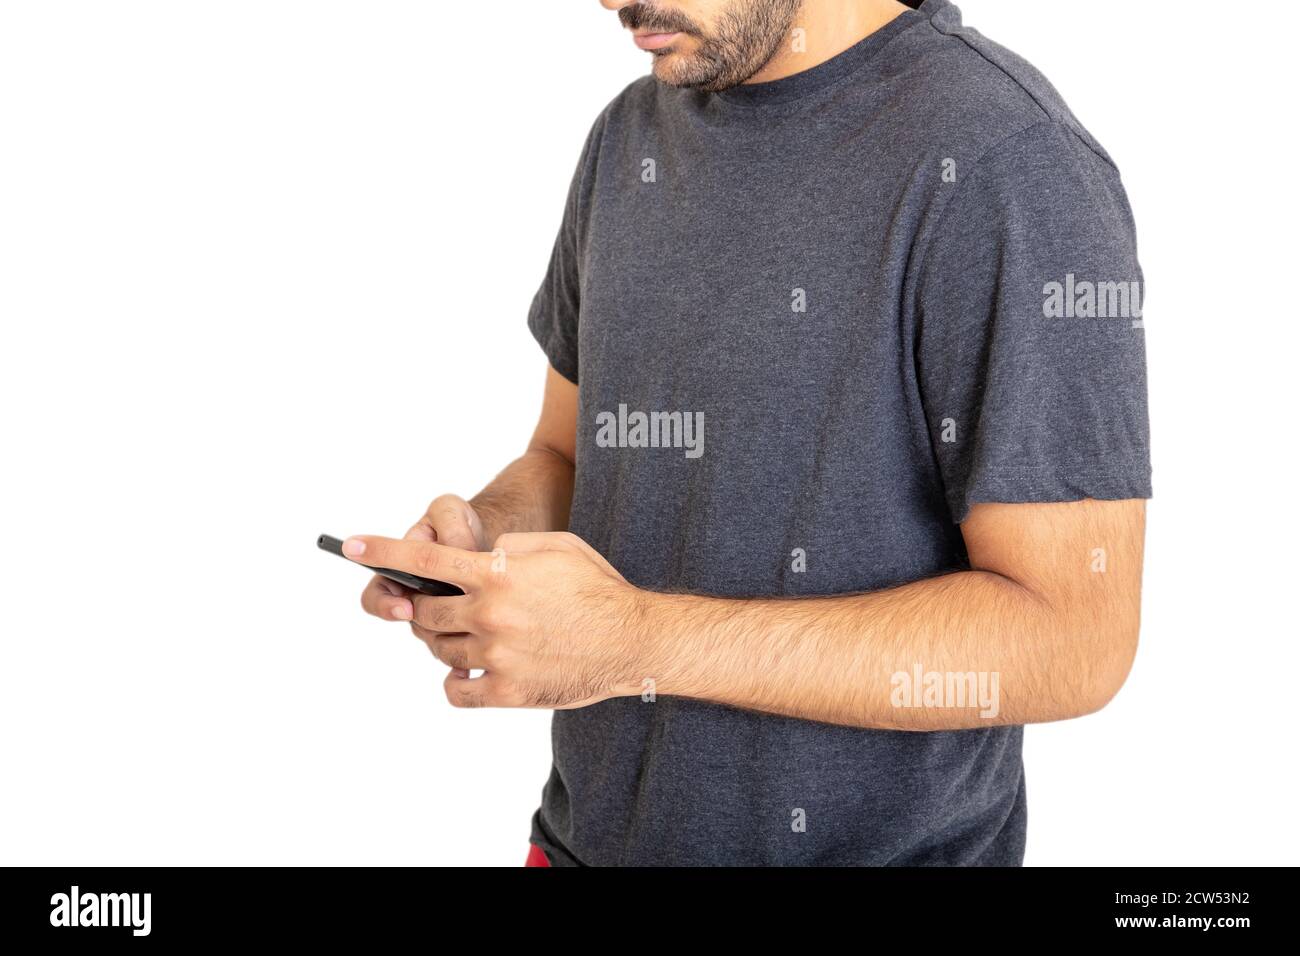 Young man wearing a blank gray t shirt lookina at his mobile phone isolated against white background. Casual male apparel, advertise template Stock Photo